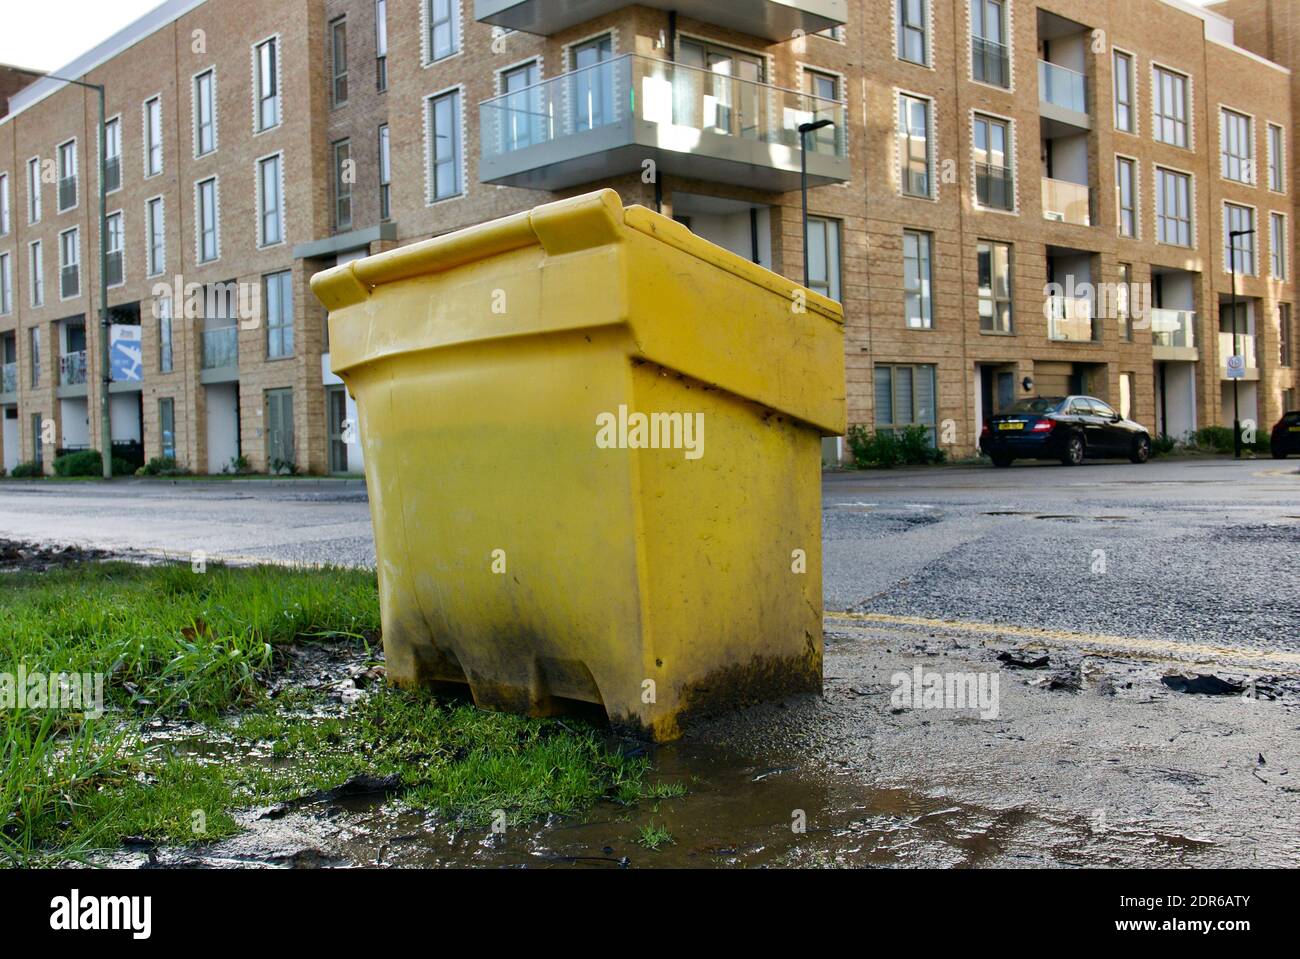 Yellow grit salt container bin side of road in London. England often struggles to cope with cold snaps and icy roads due to salt shortage. Stock Photo